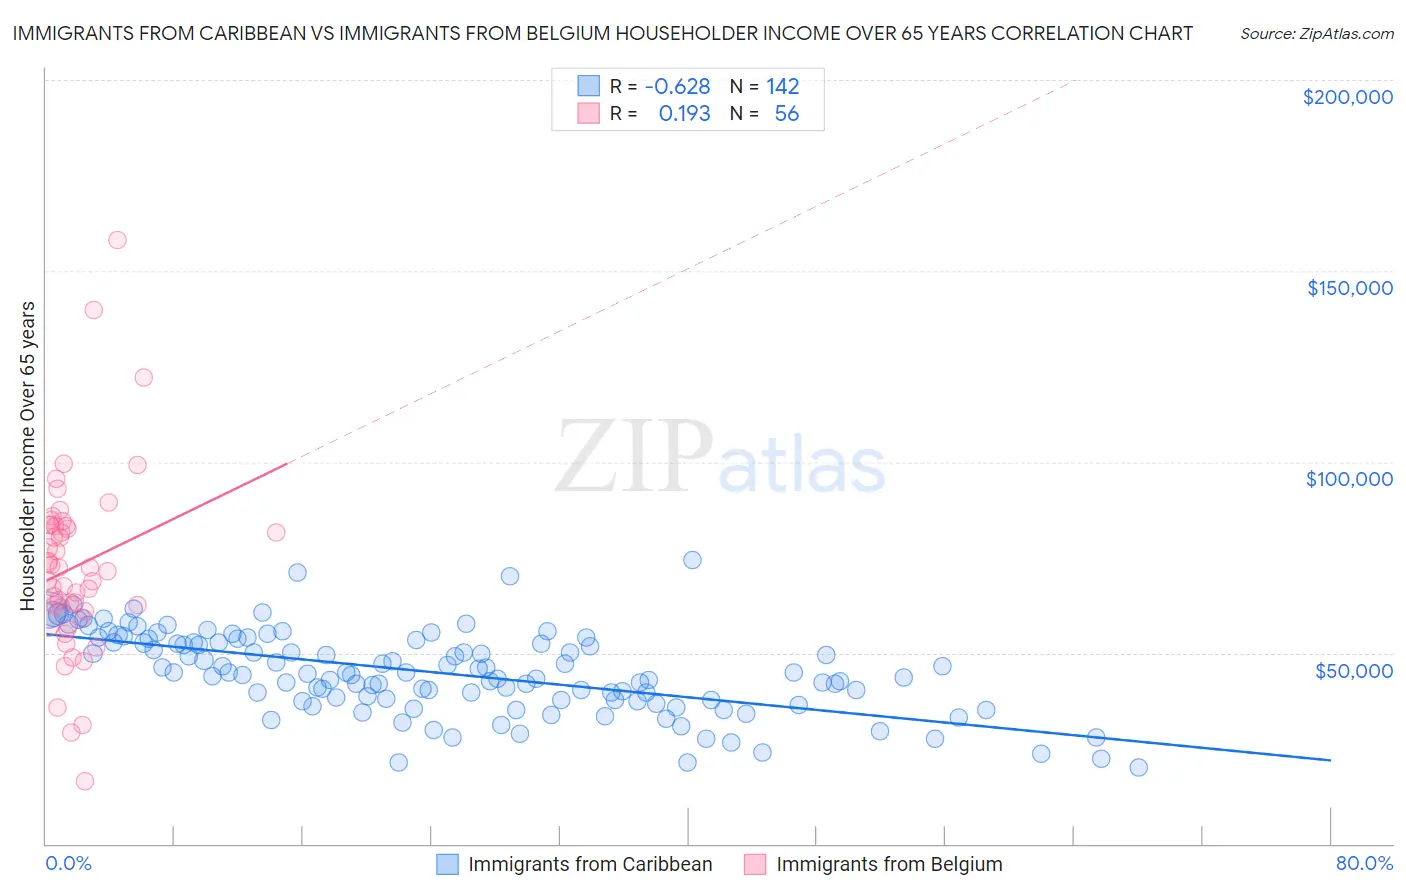 Immigrants from Caribbean vs Immigrants from Belgium Householder Income Over 65 years